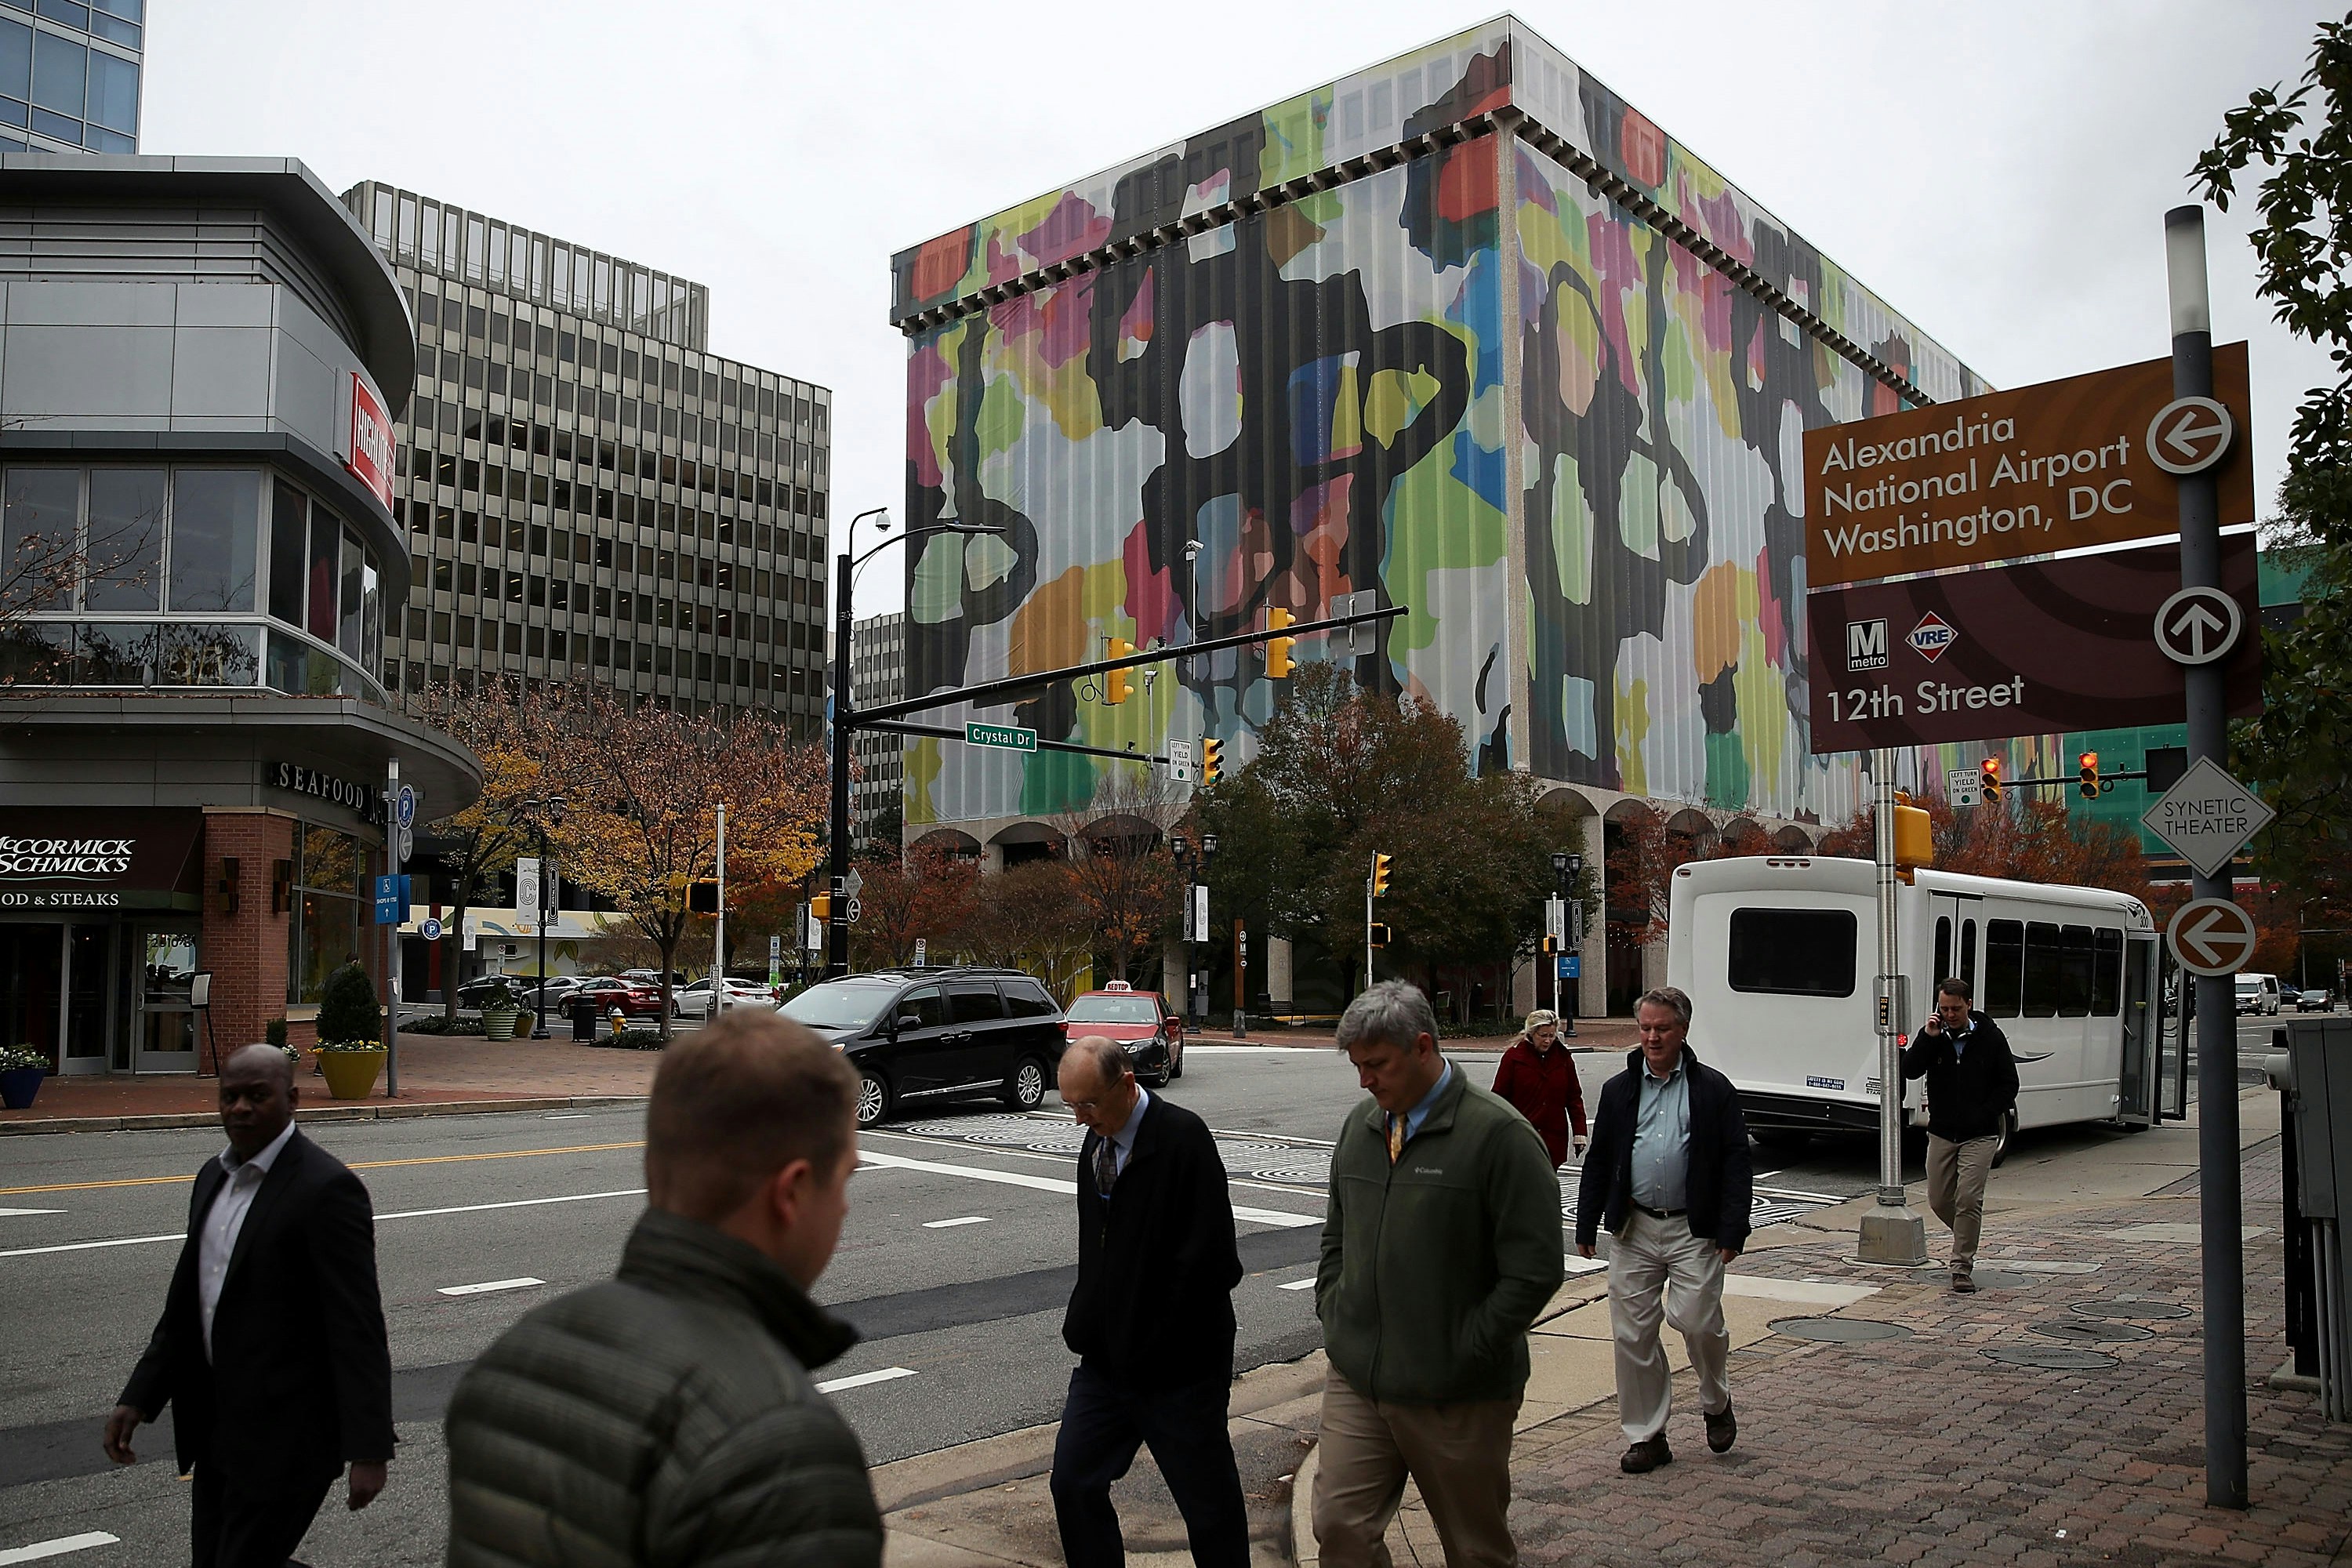 ARLINGTON, VA - NOVEMBER 13:  A tarp drapes the 1851 S. Bell Street building in the Crystal City area on November 13, 2018 In Arlington, Virginia. Amazon announced today that it has chosen Crystal City in Arlington, Virginia and Long Island City in Queens, New York as the two locations which will both serve as additional headquarters for the company.  (Photo by Mark Wilson/Getty Images)